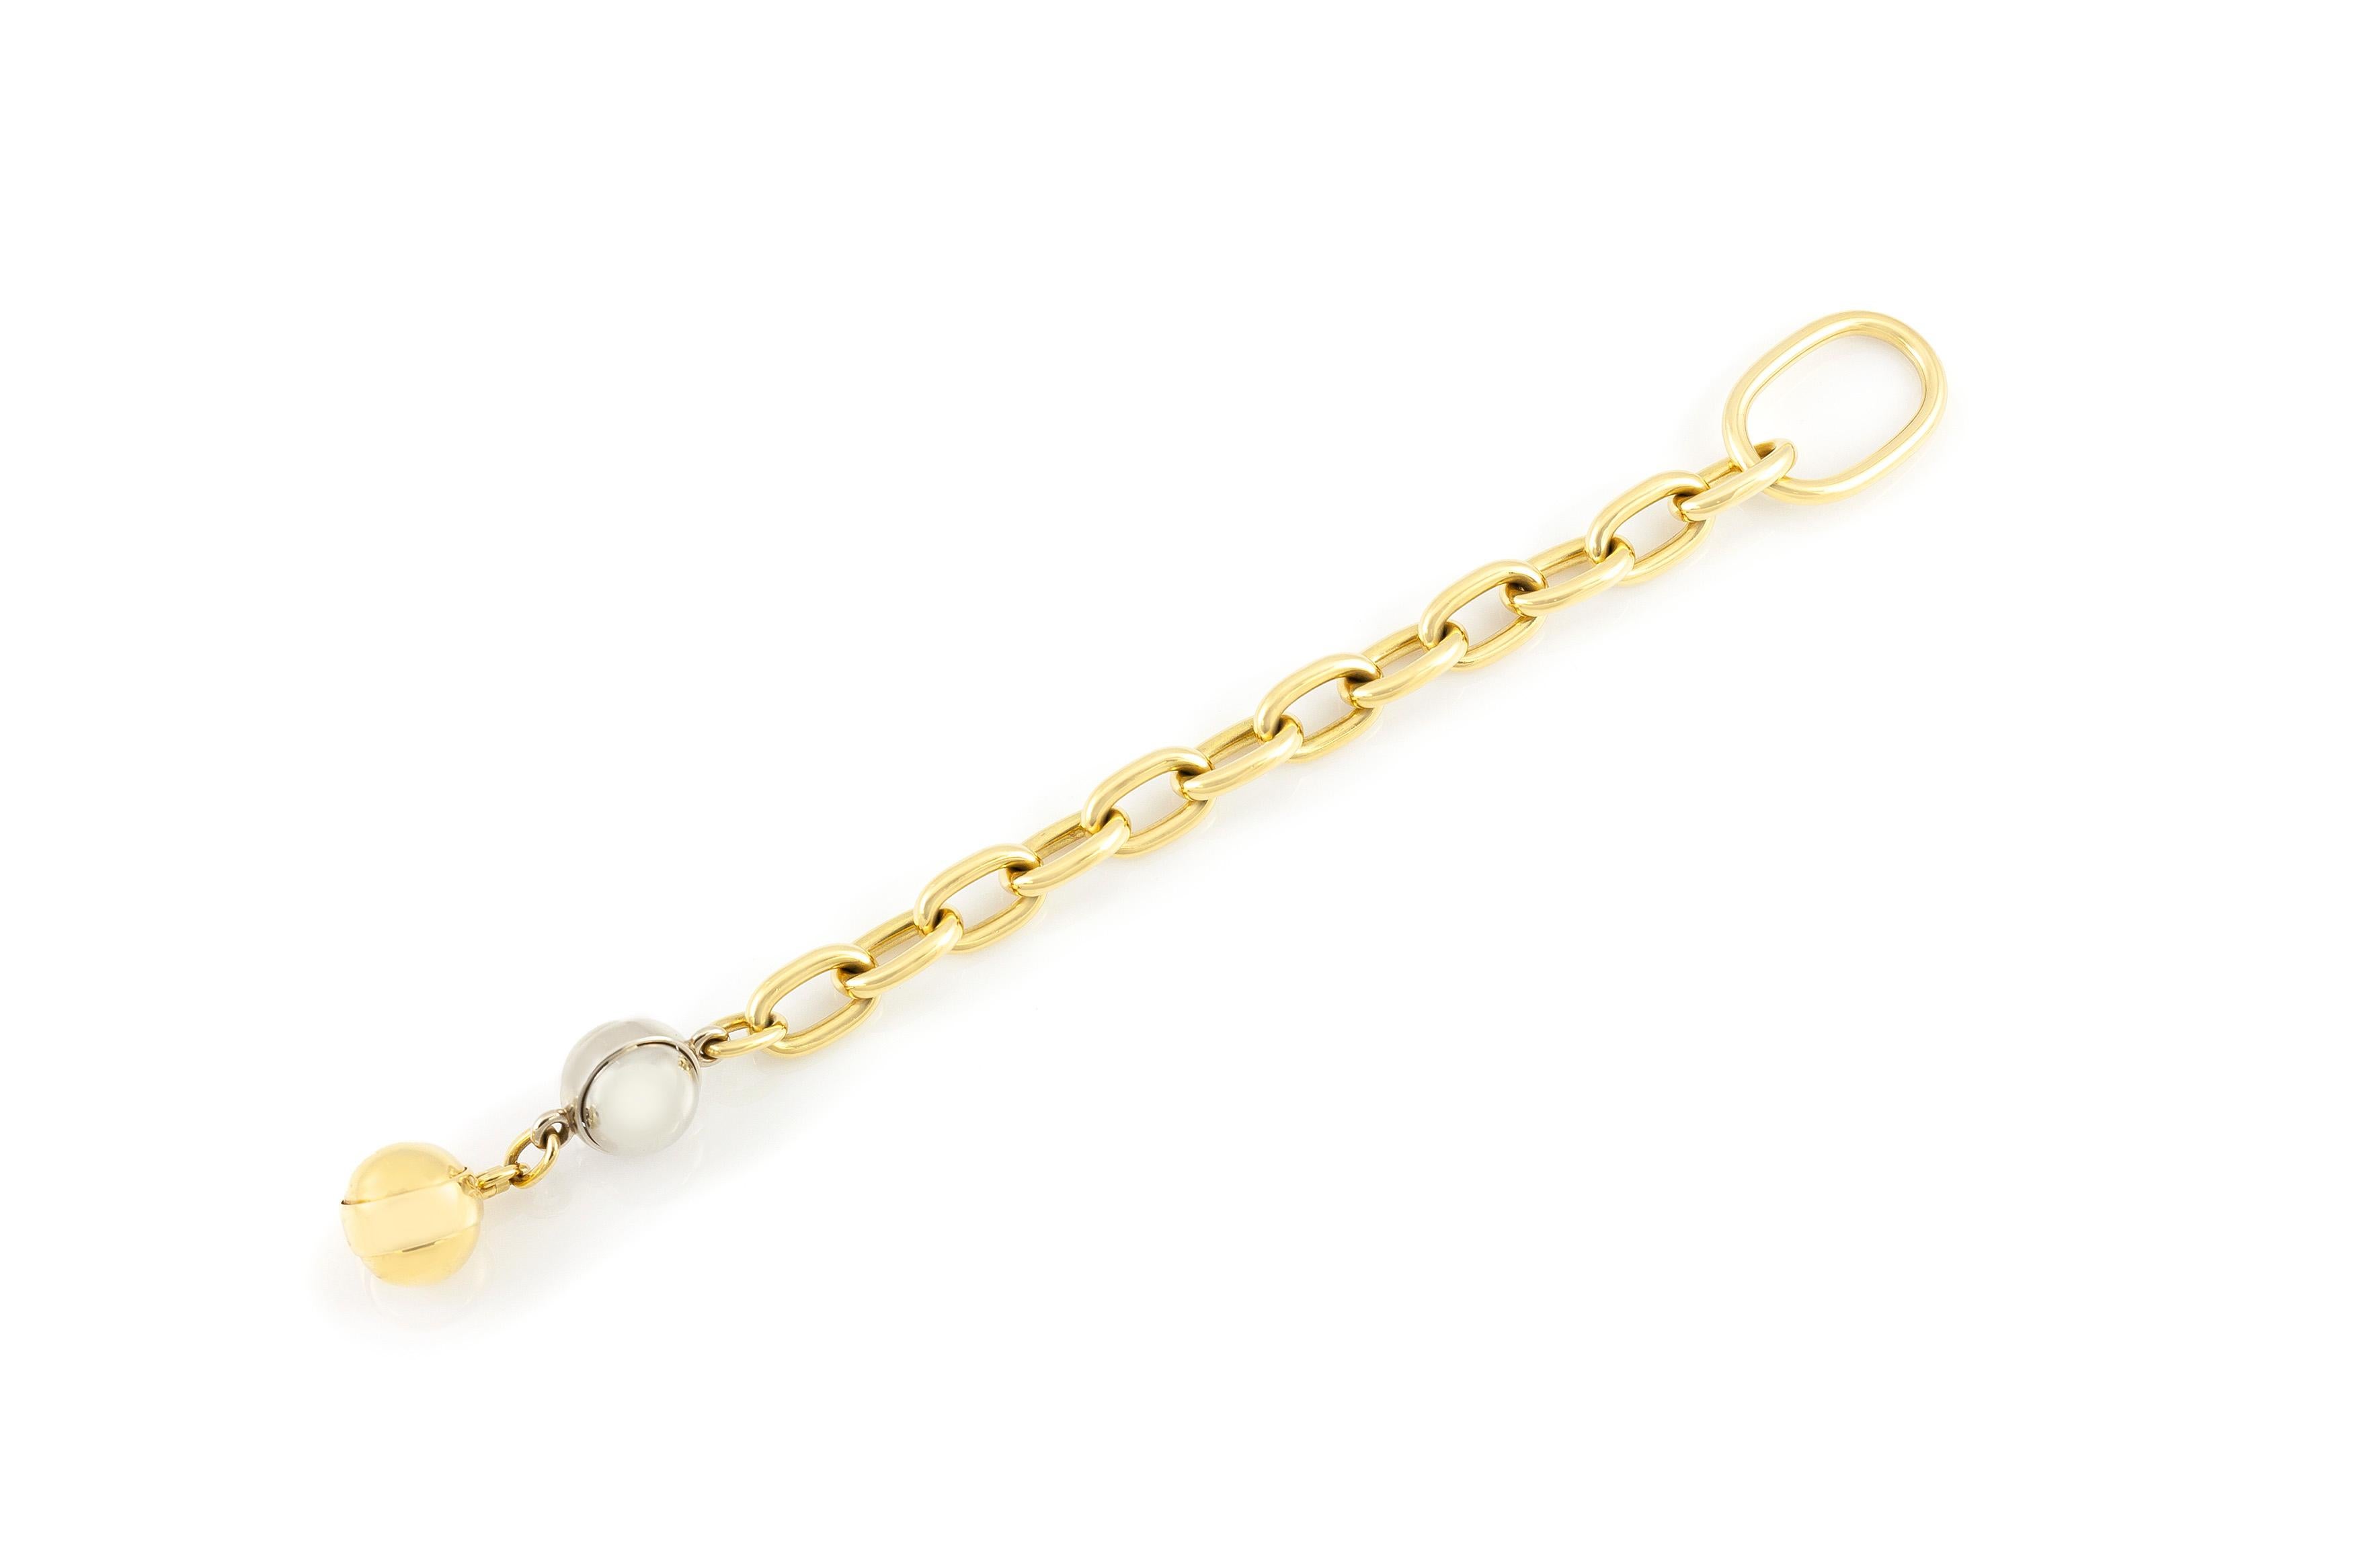 Finely crafted in 18k yellow and white gold.
Signed by Pomellato, from their Boule Collection
The bracelet measures 8 inches from one end to the other. Since the last ball goes through the large link for closure, the bracelet would comfortably fit a